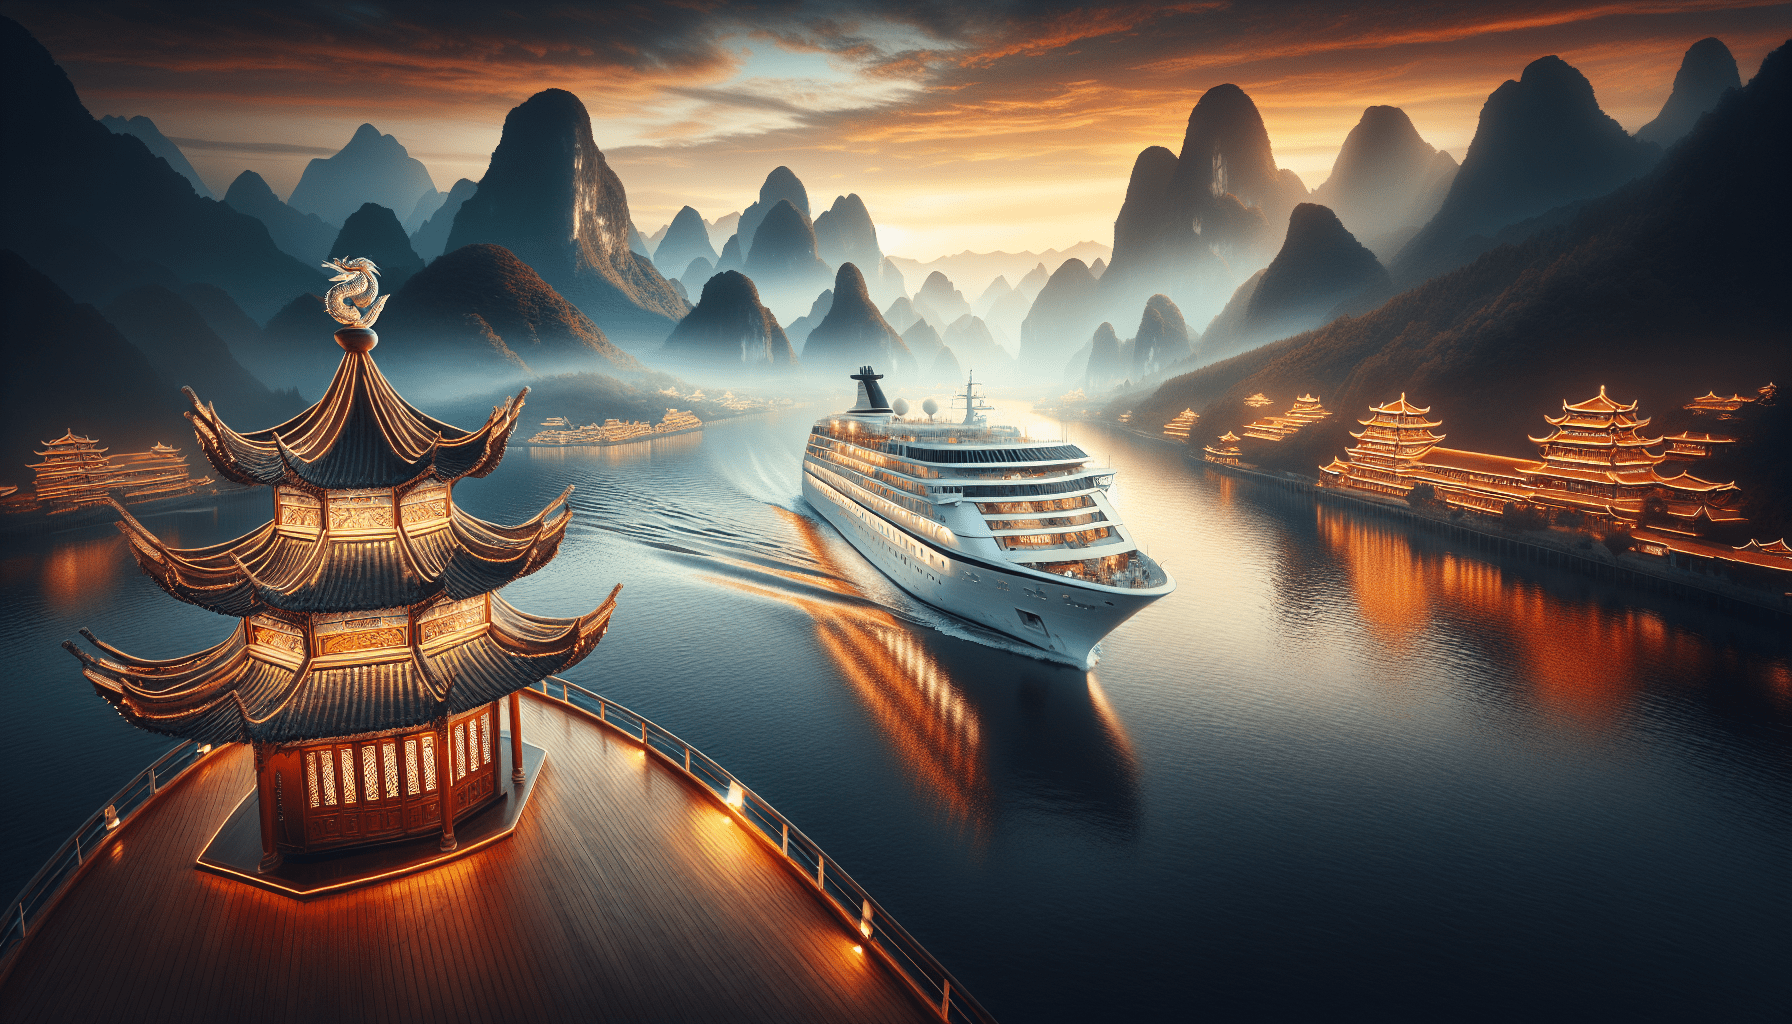 Is There A Cruise That Goes To China?